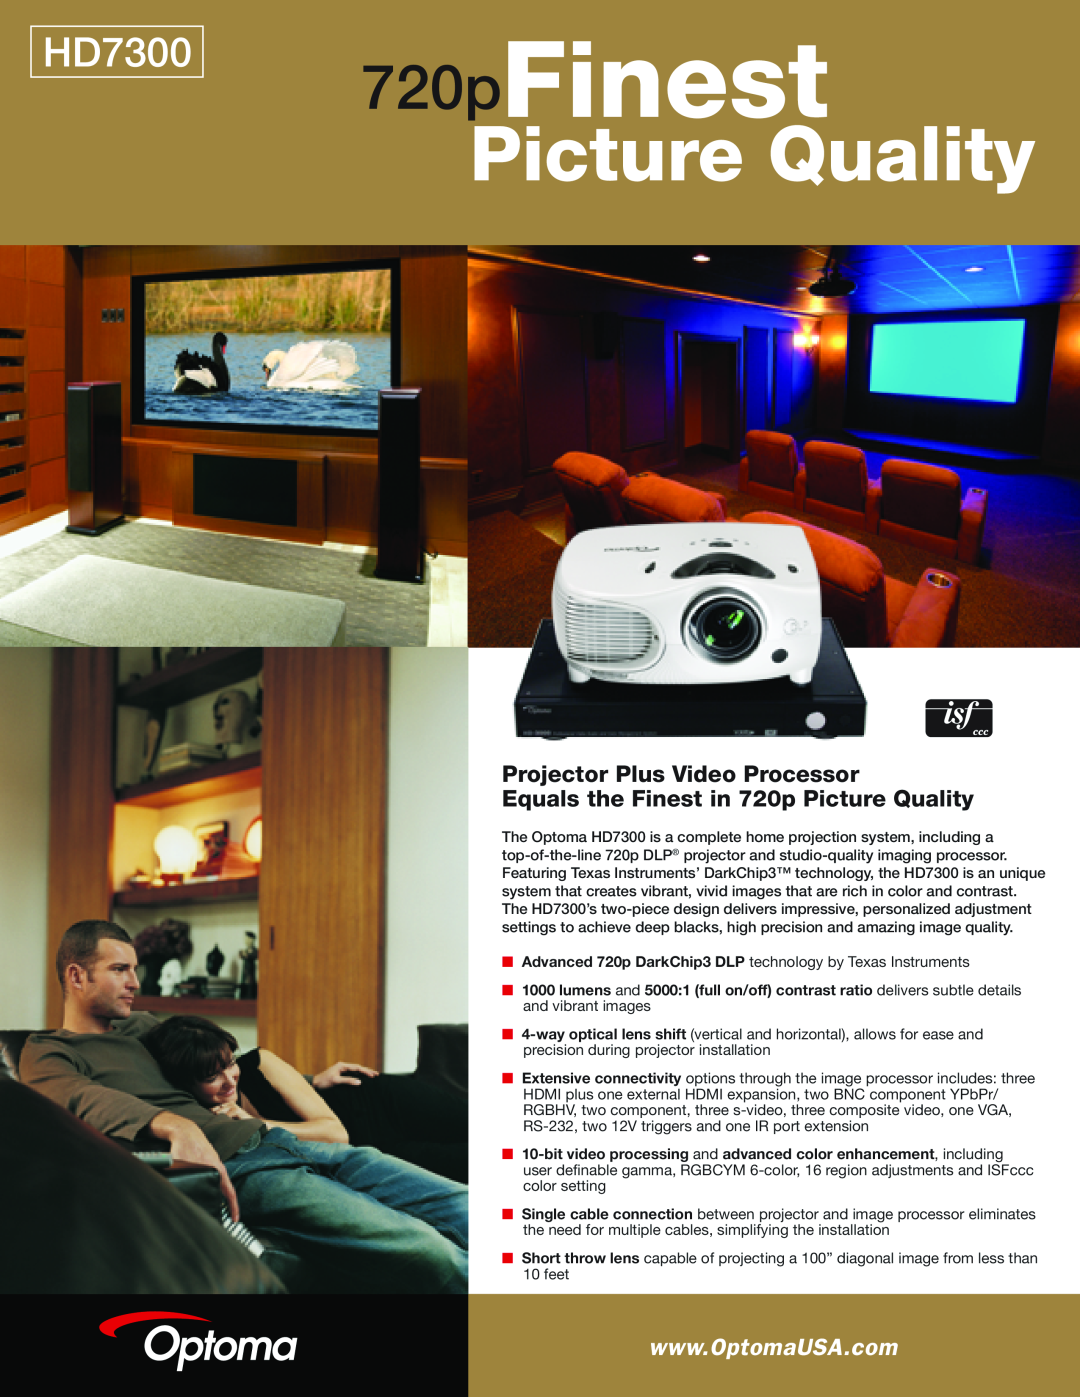 Optoma Technology HD7300 manual 720pFinest, Picture Quality, Projector Plus Video Processor 